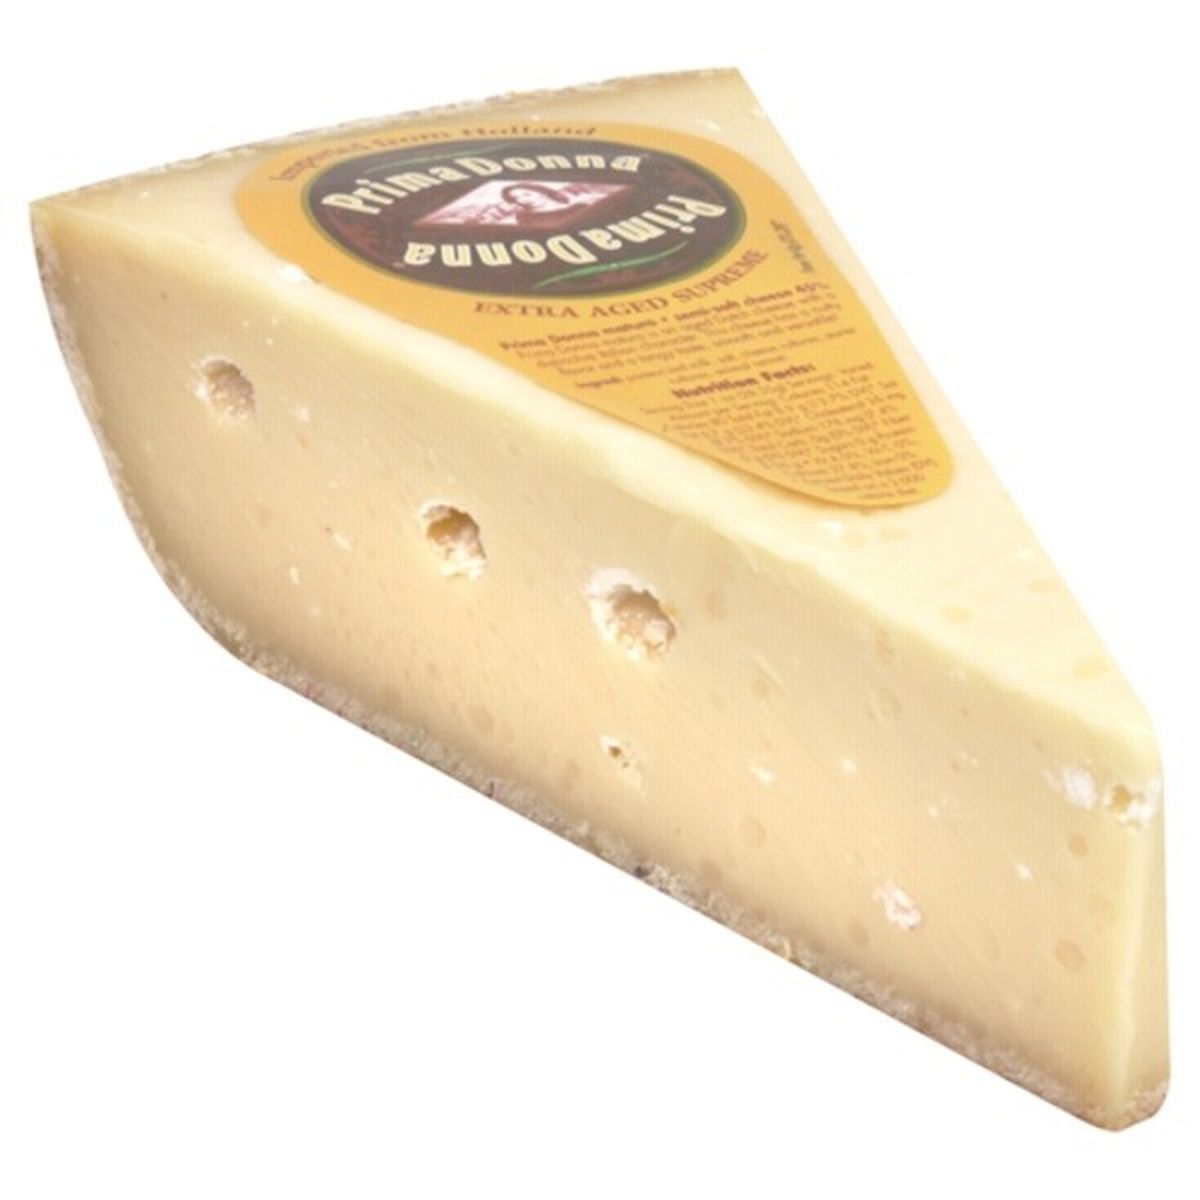 Calories in Prima Donna Extra Aged Gouda Cheese